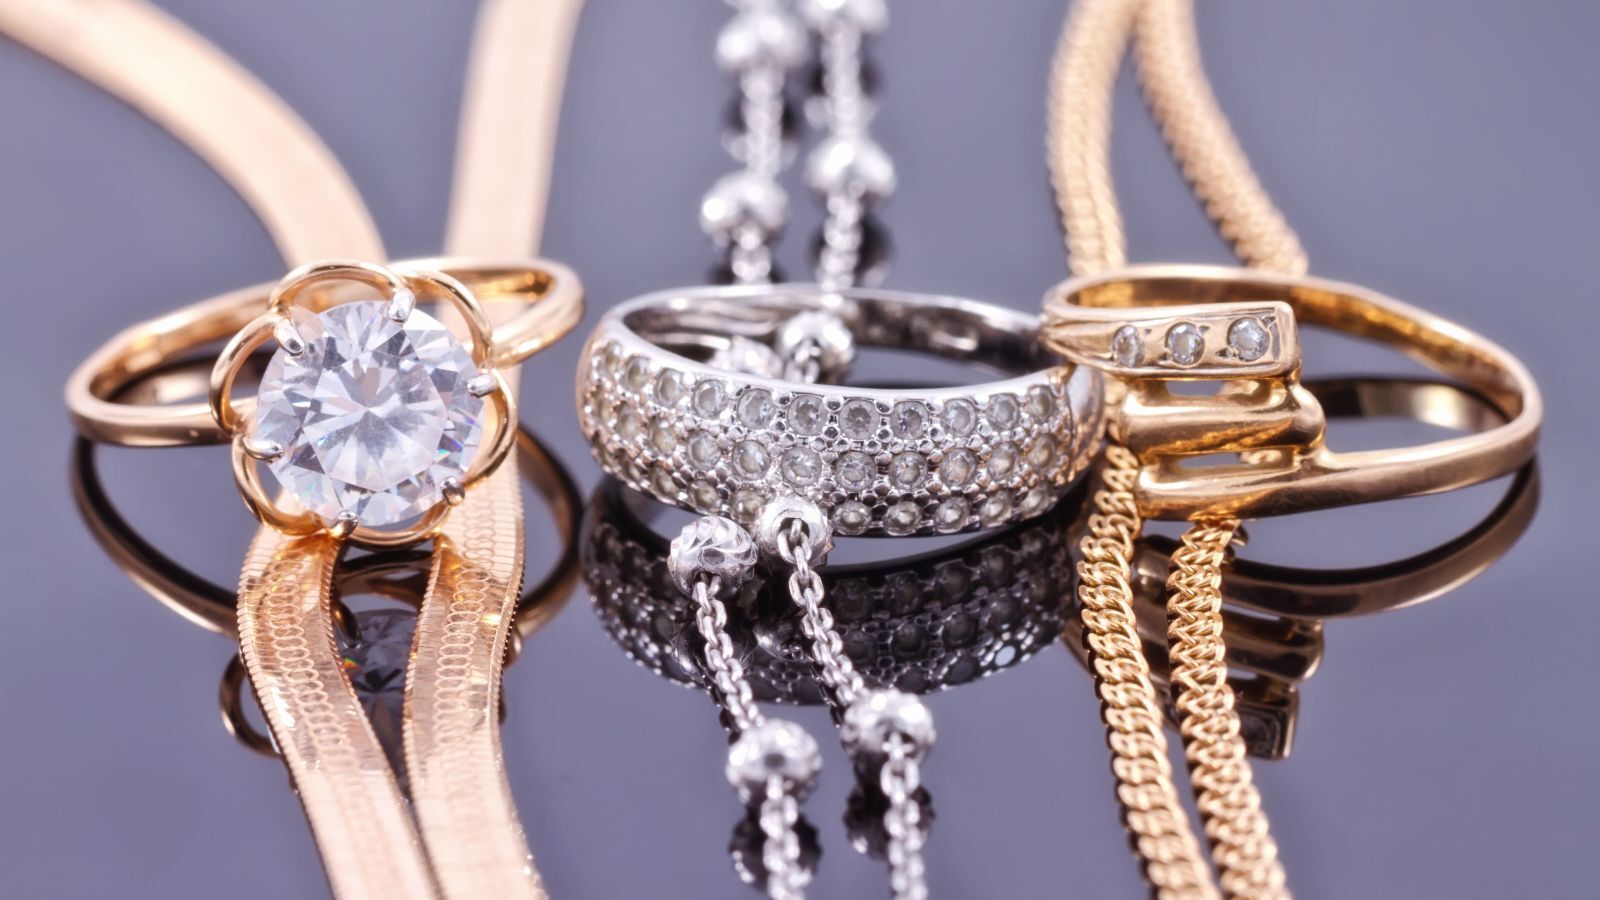 13 Best QVC Jewelry Brands: Sparkling & Colorful for Lady